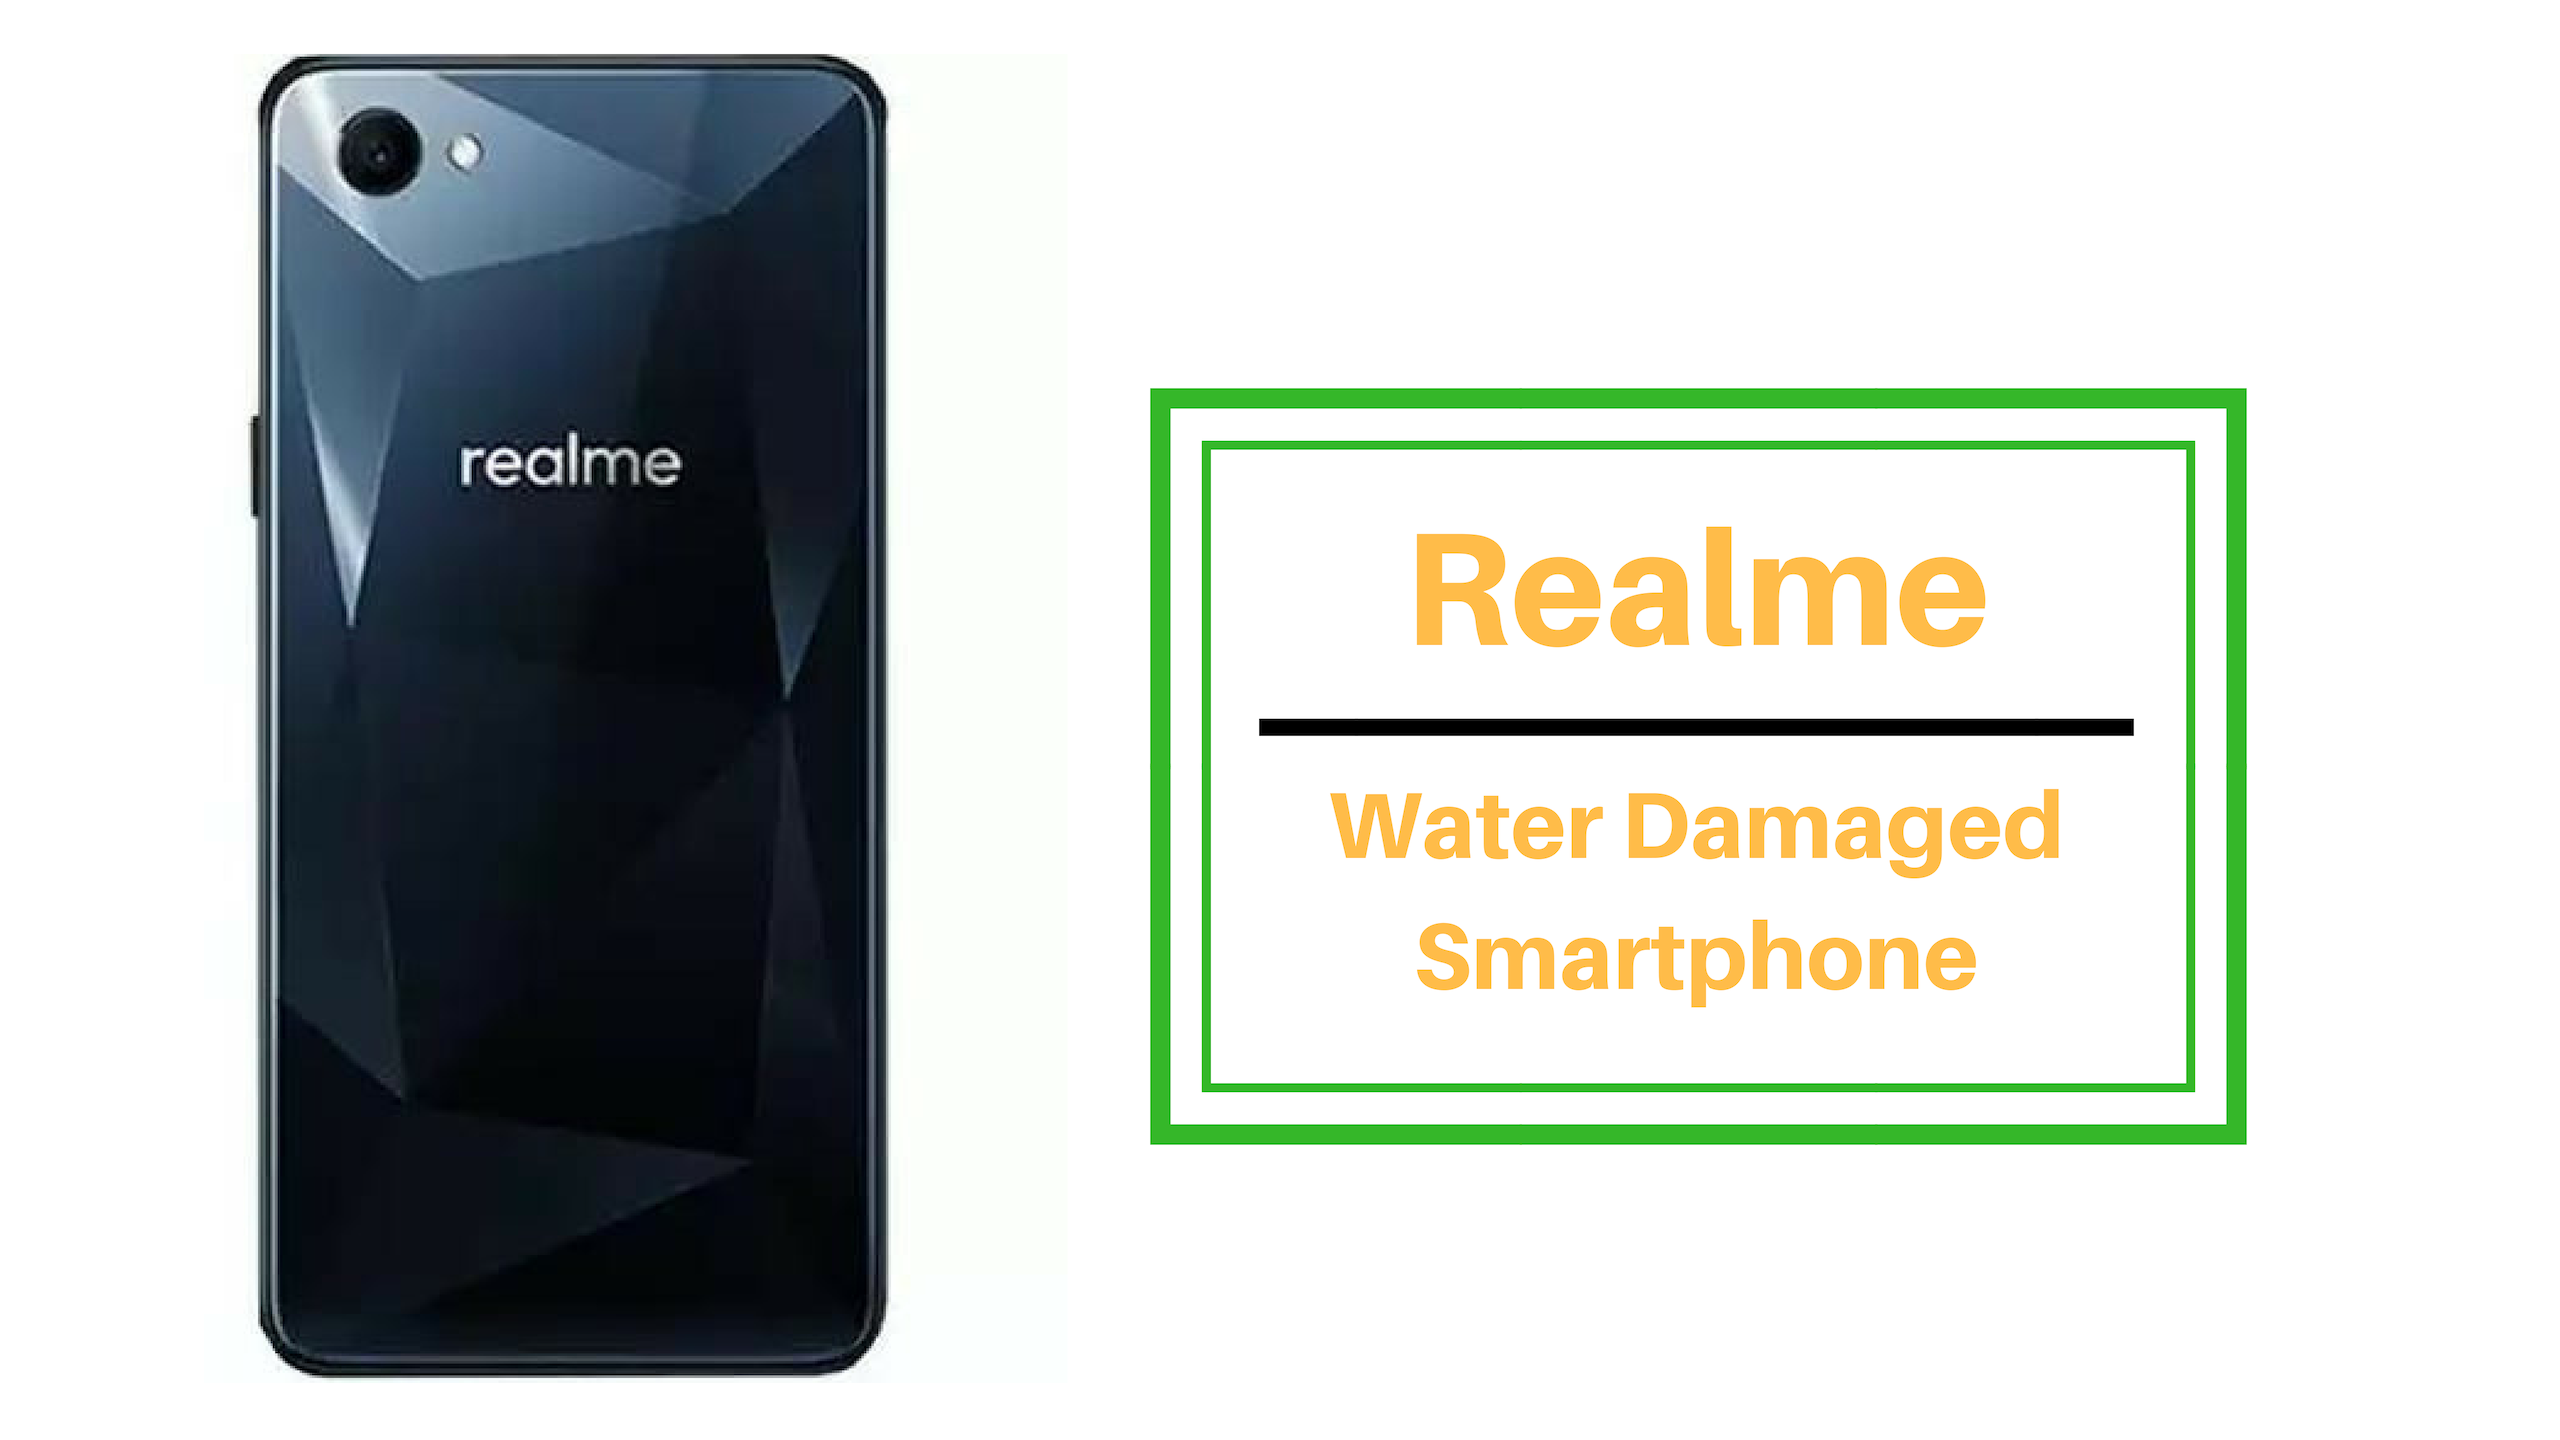 How to fix Realme water damaged smartphone?